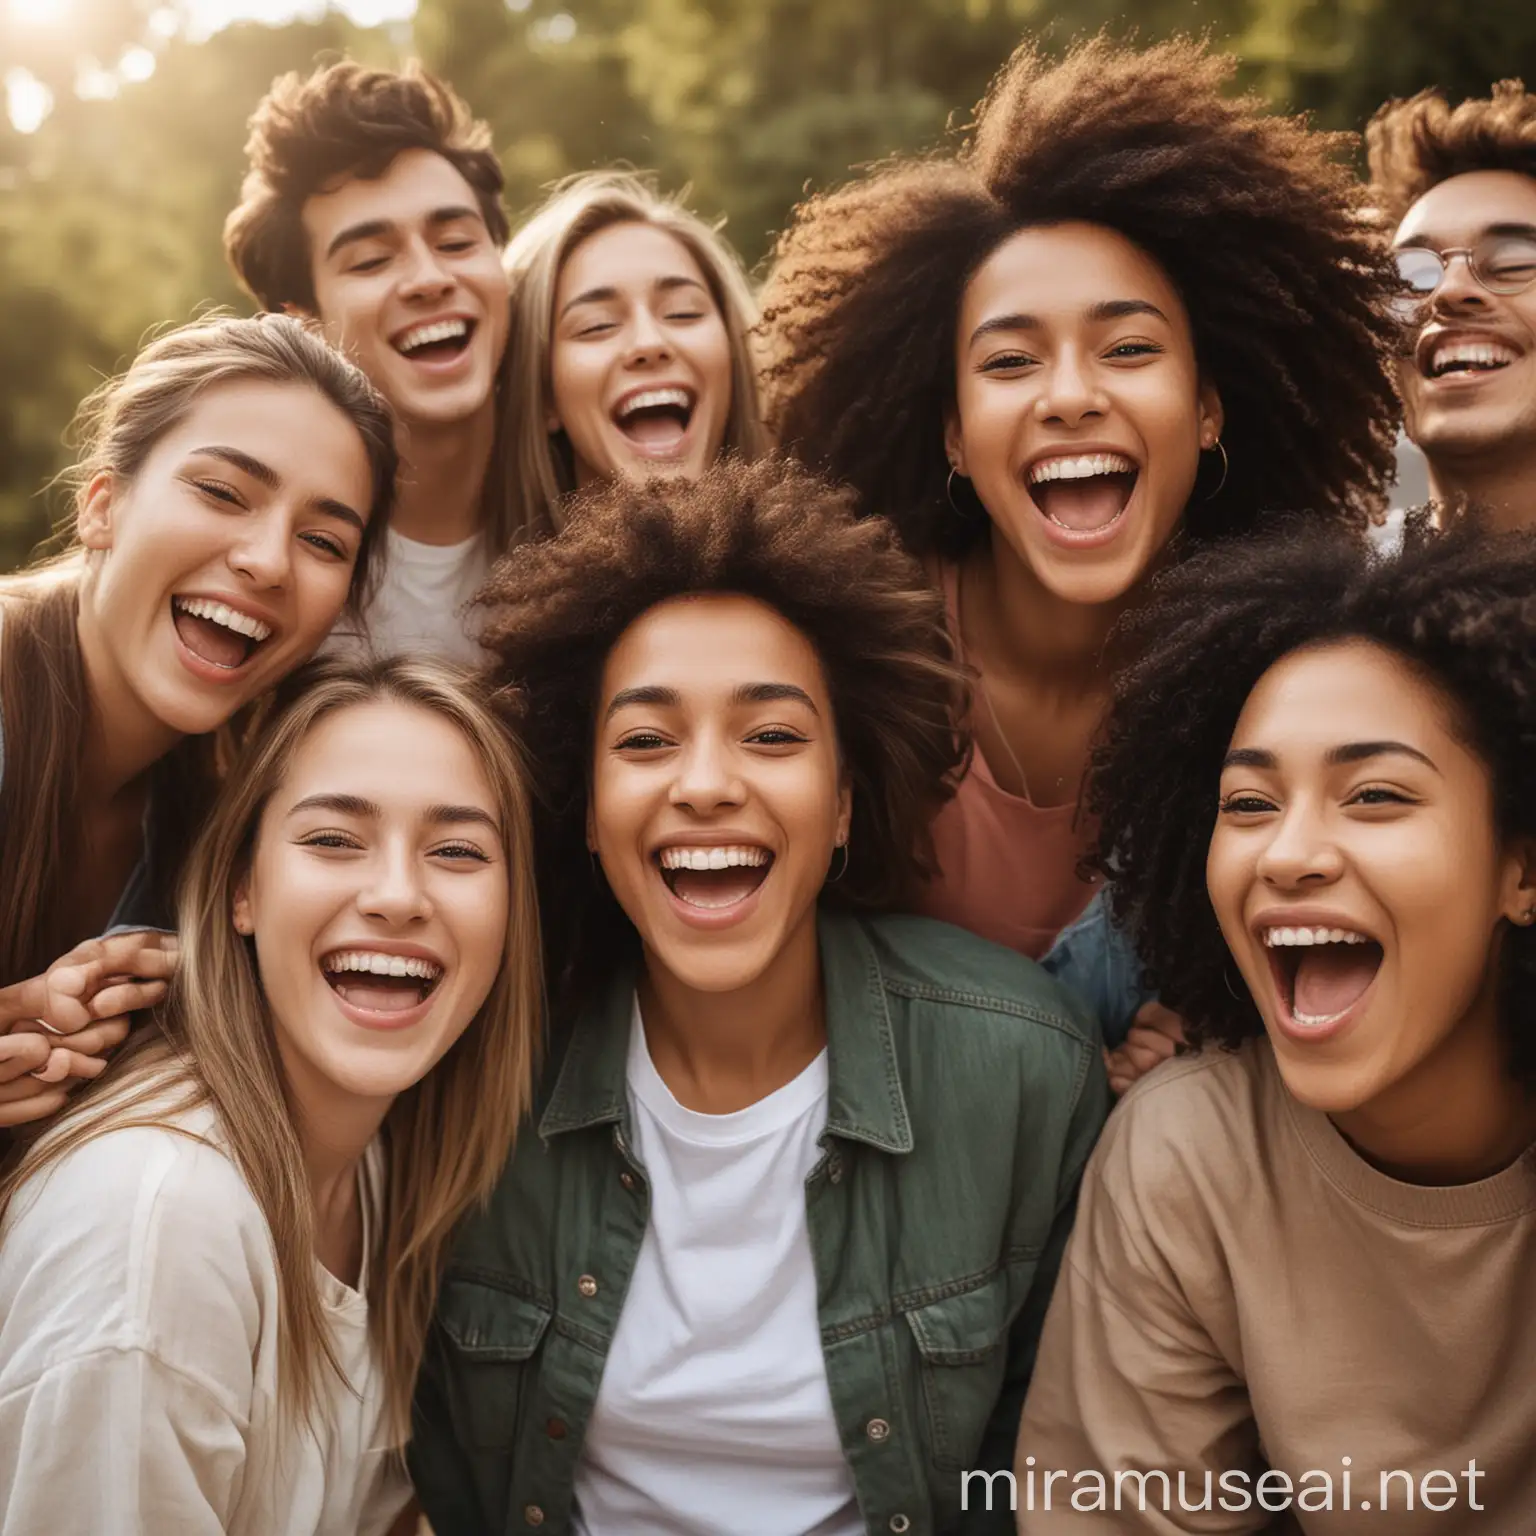 a group of several people having fun looking happy together. they should represent a diverse group of ethnicities and genders. it should be something that would appeal to someone currently dealing with mental health issues looking to feel calm and peaceful again